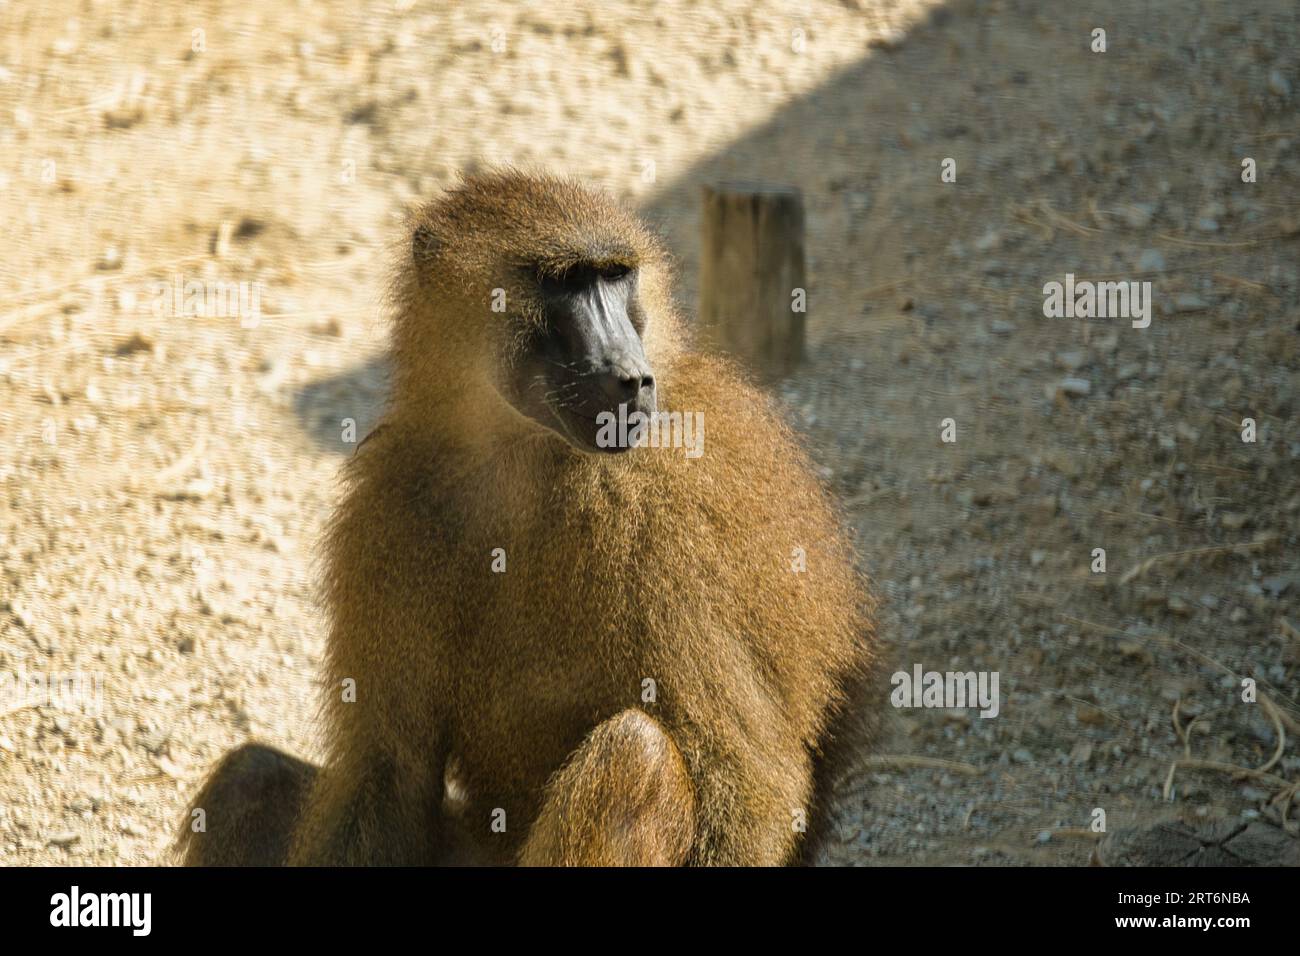 Guinea baboons in the Paris zoologic park, formerly known as the Bois de Vincennes, 12th arrondissement of Paris, which covers an area of 14.5 hectare Stock Photo